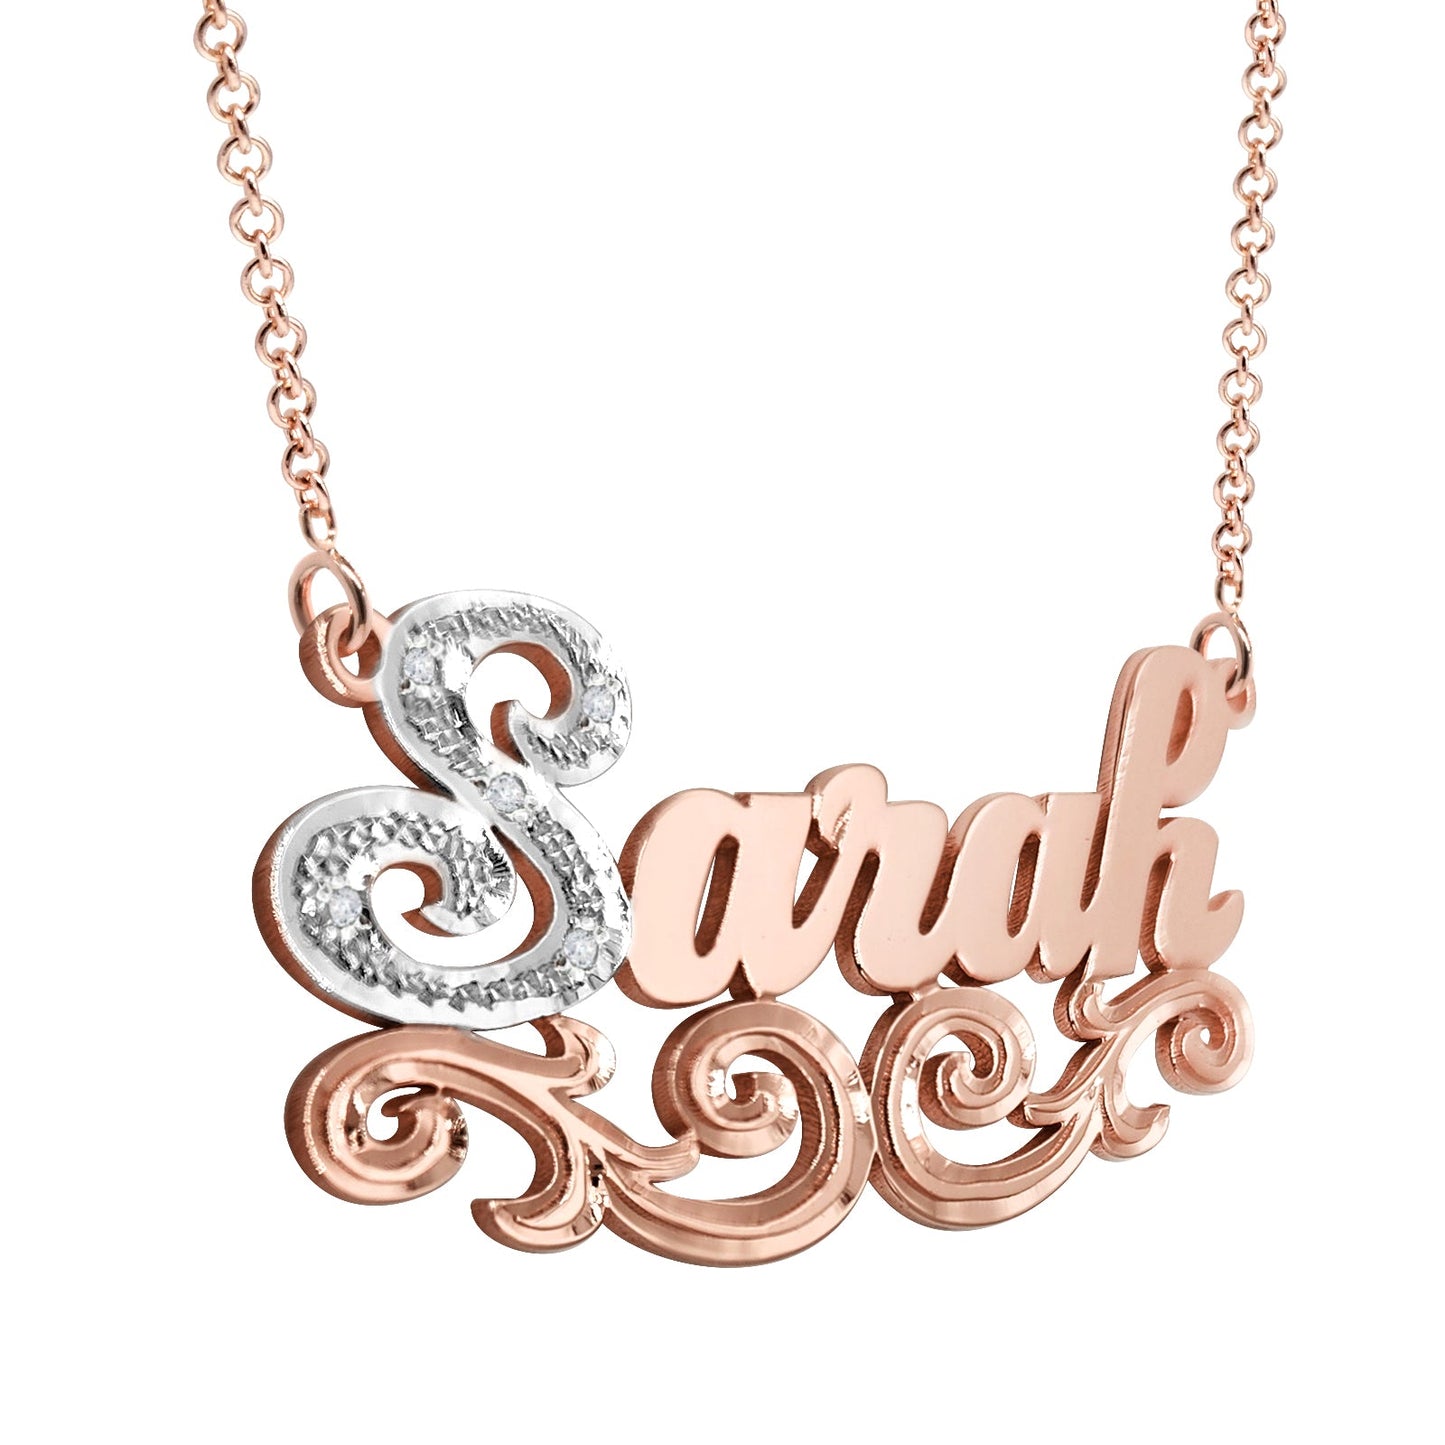 Nameplate Pendant with Diamonds and Fancy Filigree in Sterling Silver